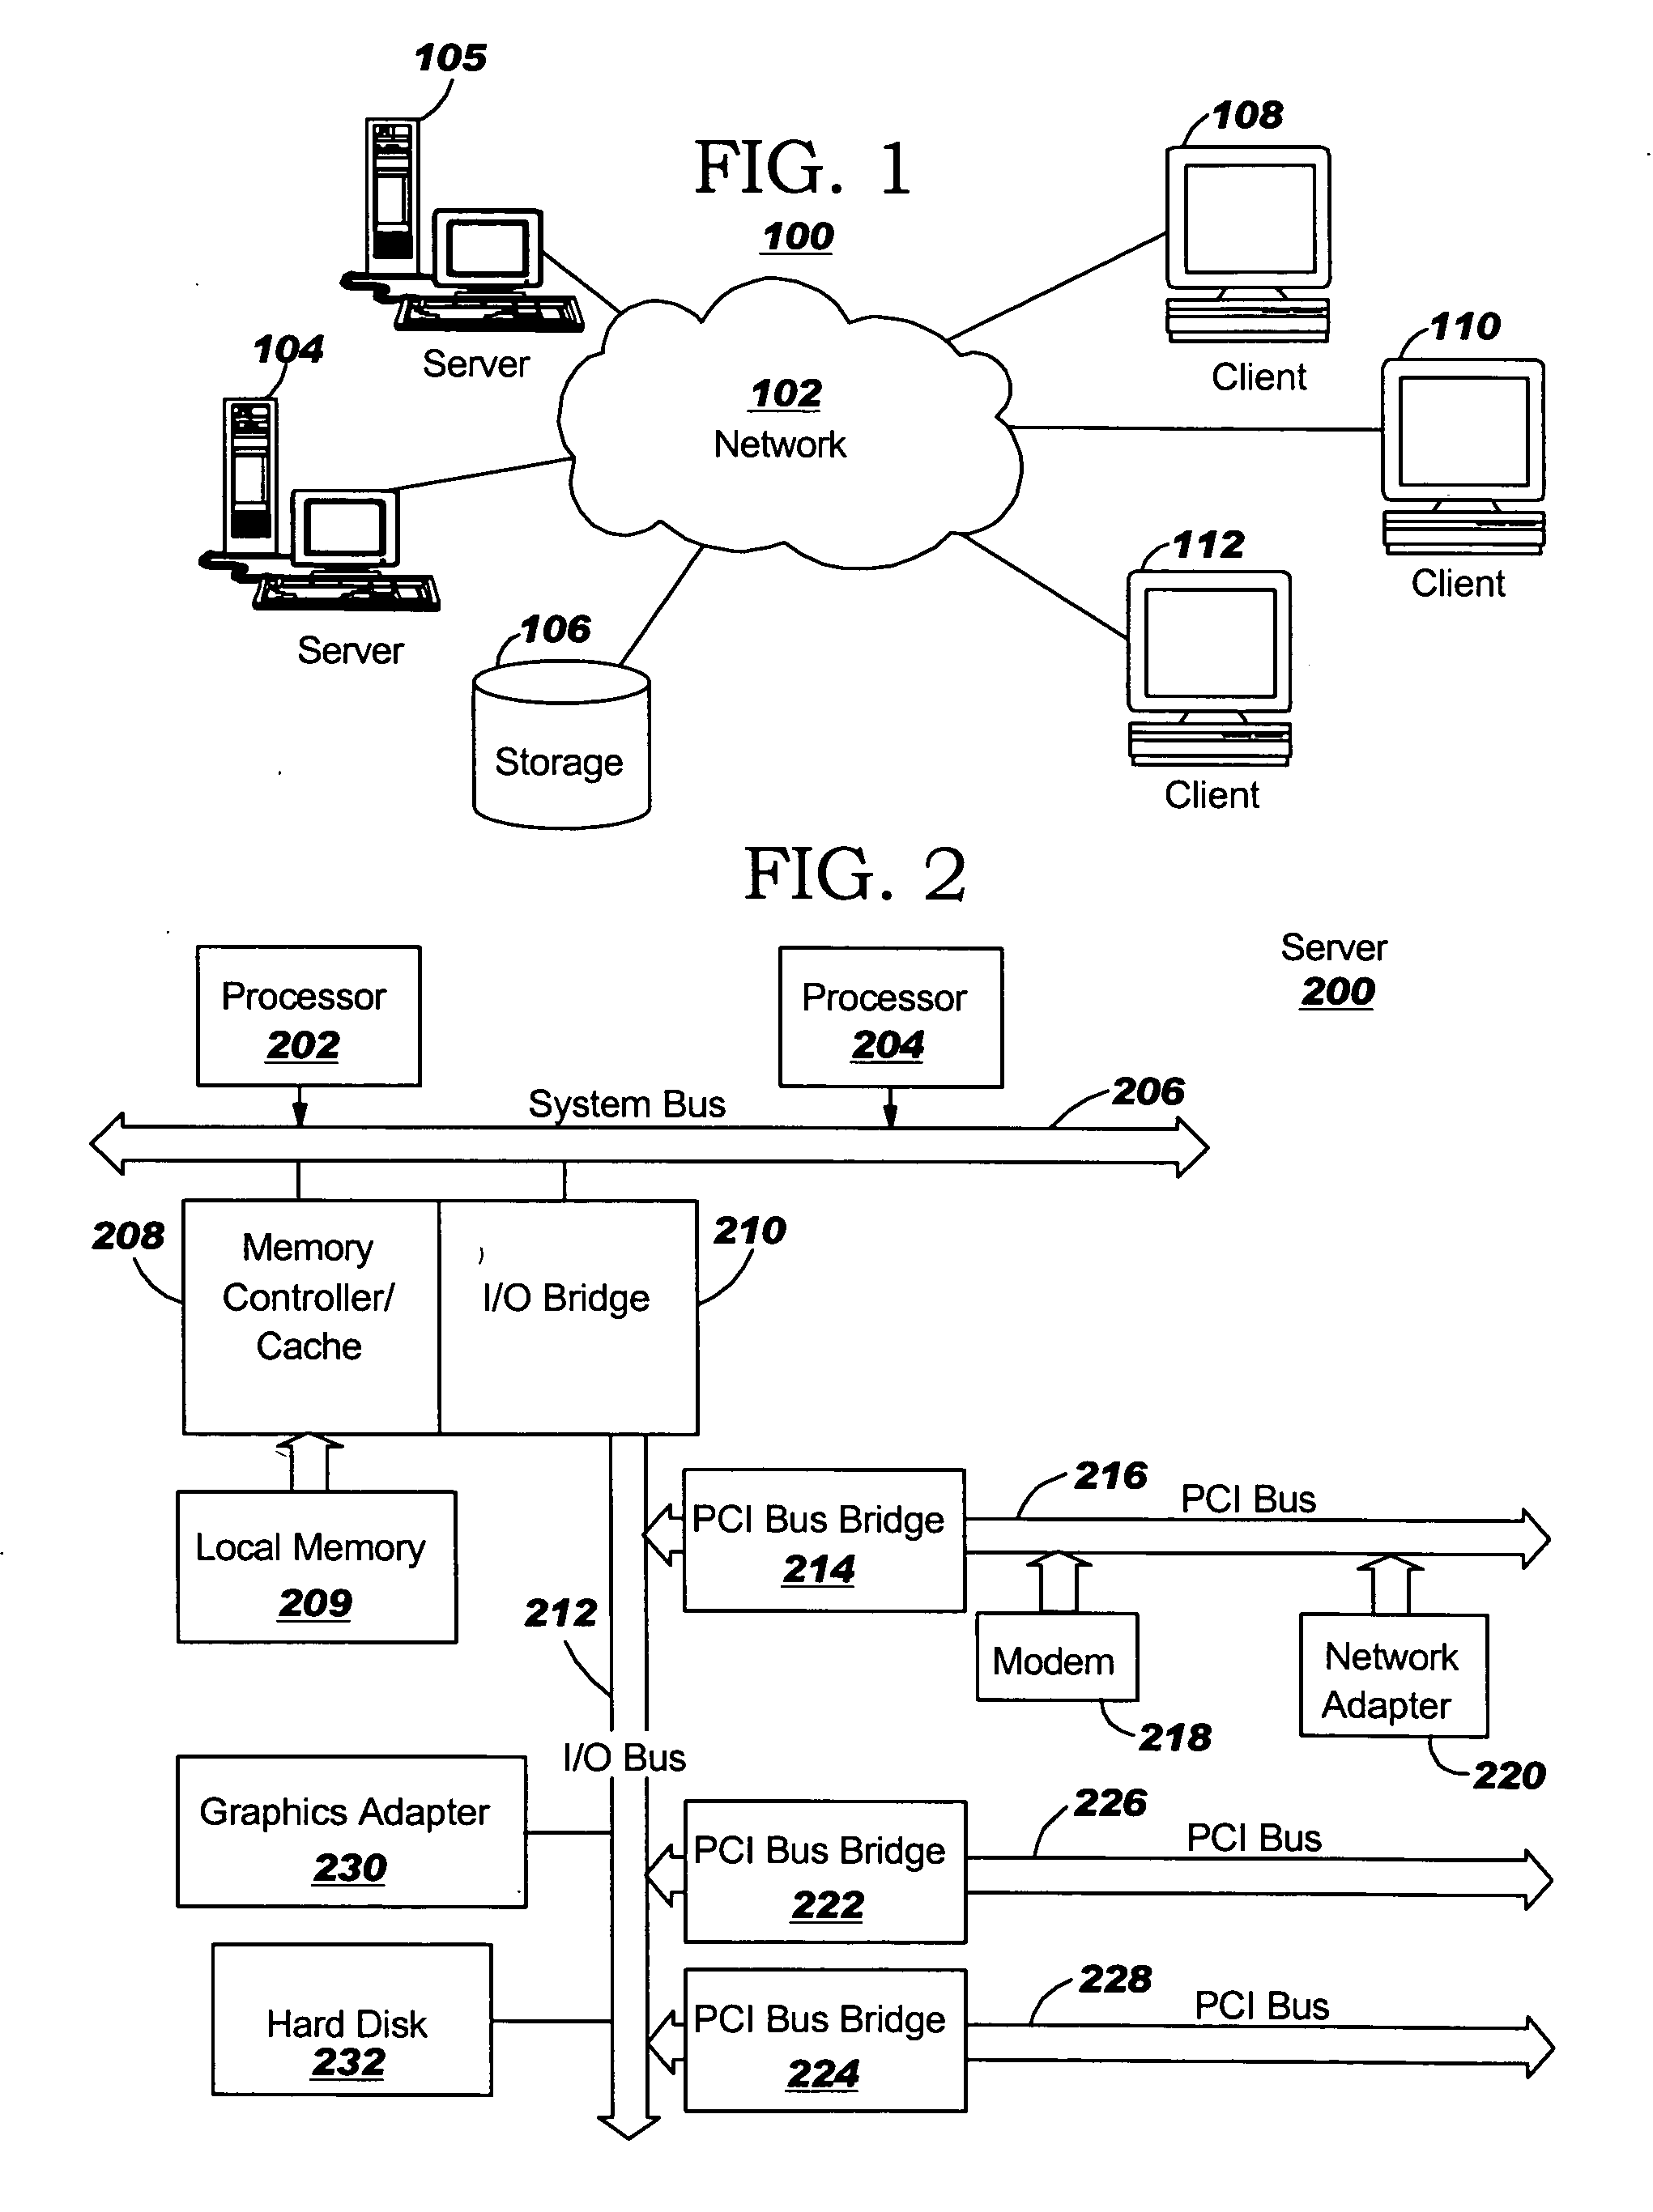 System for dynamic network reconfiguration and quarantine in response to threat conditions